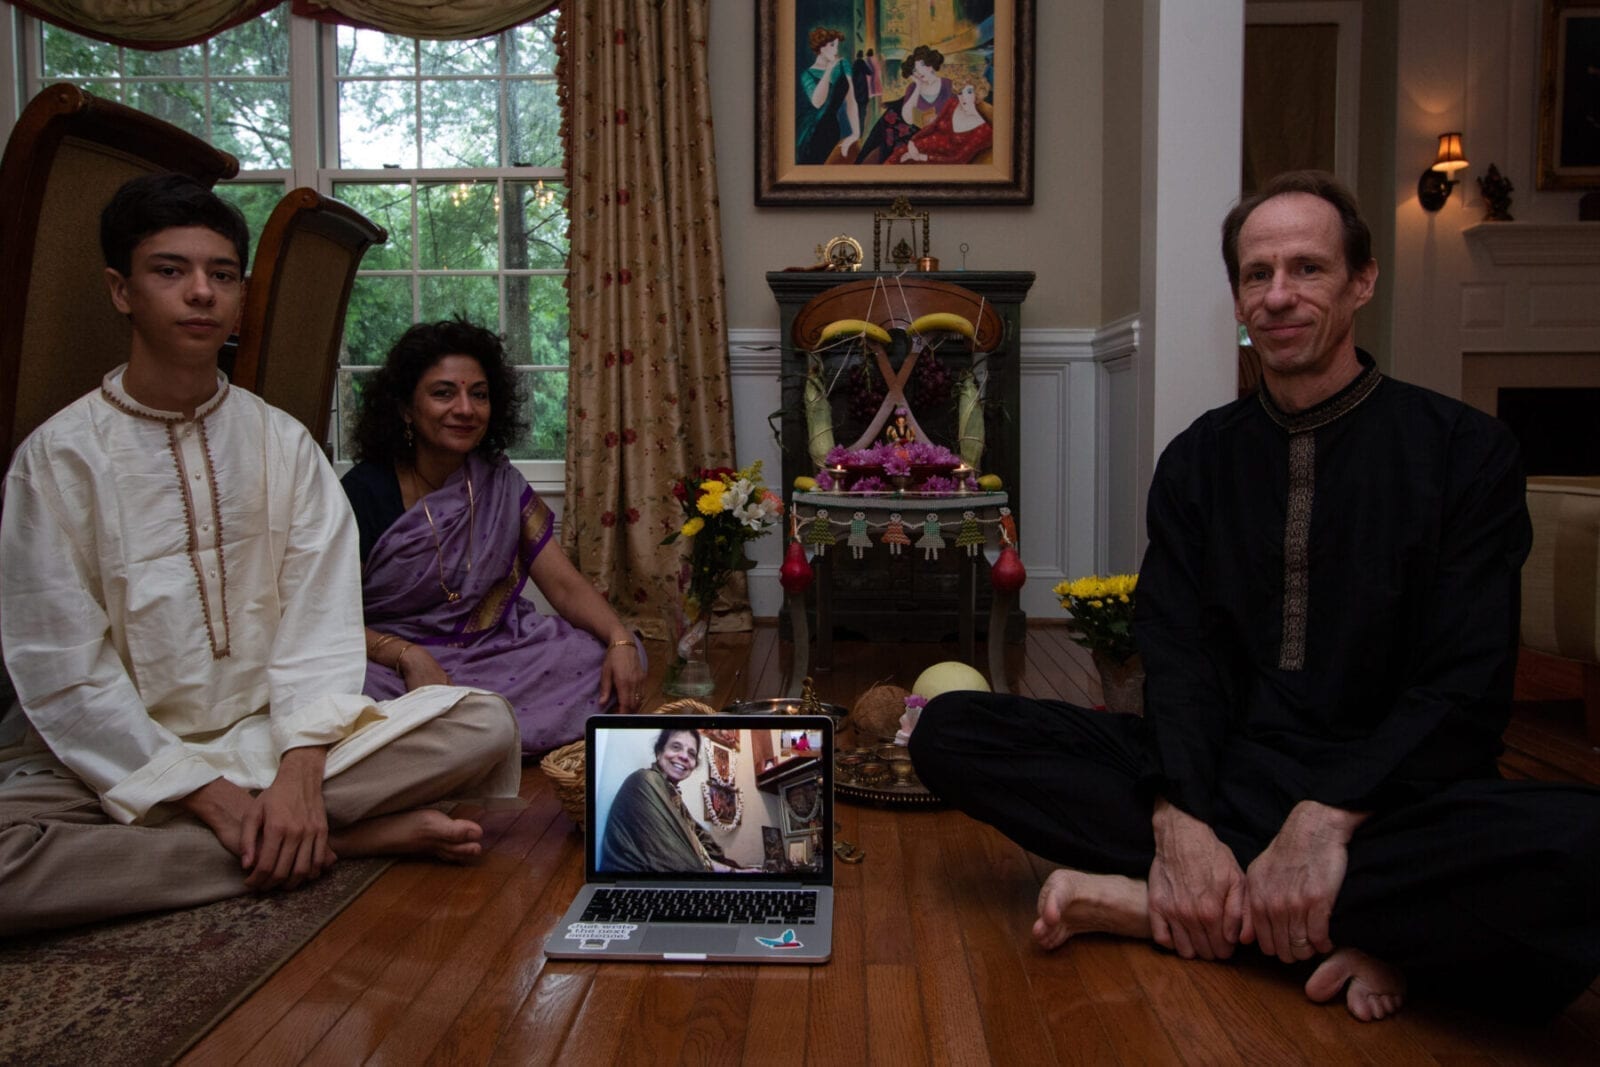 Nikhil Walling, 16, his parents, Smitha and John Walling, and his grandmother, Shantha Rao (on FaceTime) pose for a family portrait at their home in Wayne, PA on August 23, 2020. Every fall, the family celebrates the Hindu festival honoring Ganesha, the elephant-headed god of wisdom. Their religious practice includes special foods and rituals led by Rao, the spiritual matriarch of the family. Due to health concerns amid the coronavirus pandemic, Rao, who is 75, has been unable to travel from her home in Richland, Washington. This year, they adapted the tradition to include virtual mantras in addition to in-person prayers. (Photograph by Melina Walling)